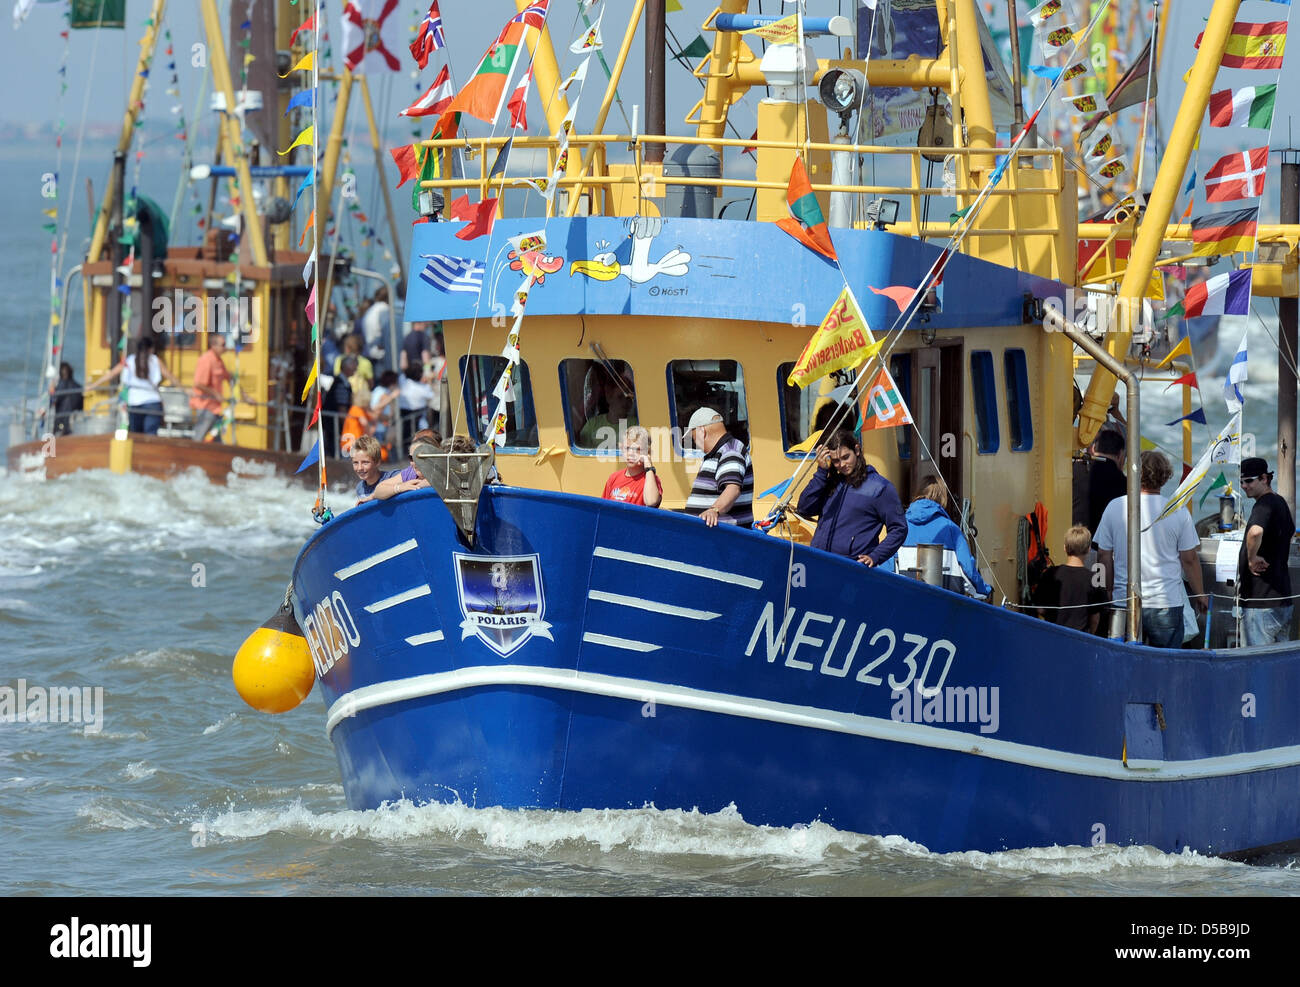 Two shrimp cutters arrive for the 44th Cutter Regatta in Neuharlingsiel, Germany, 14 August 2010. Winner of the Cutter Regatta will be the ship that impresses the spectators the most. Photo: INGO WAGNER Stock Photo